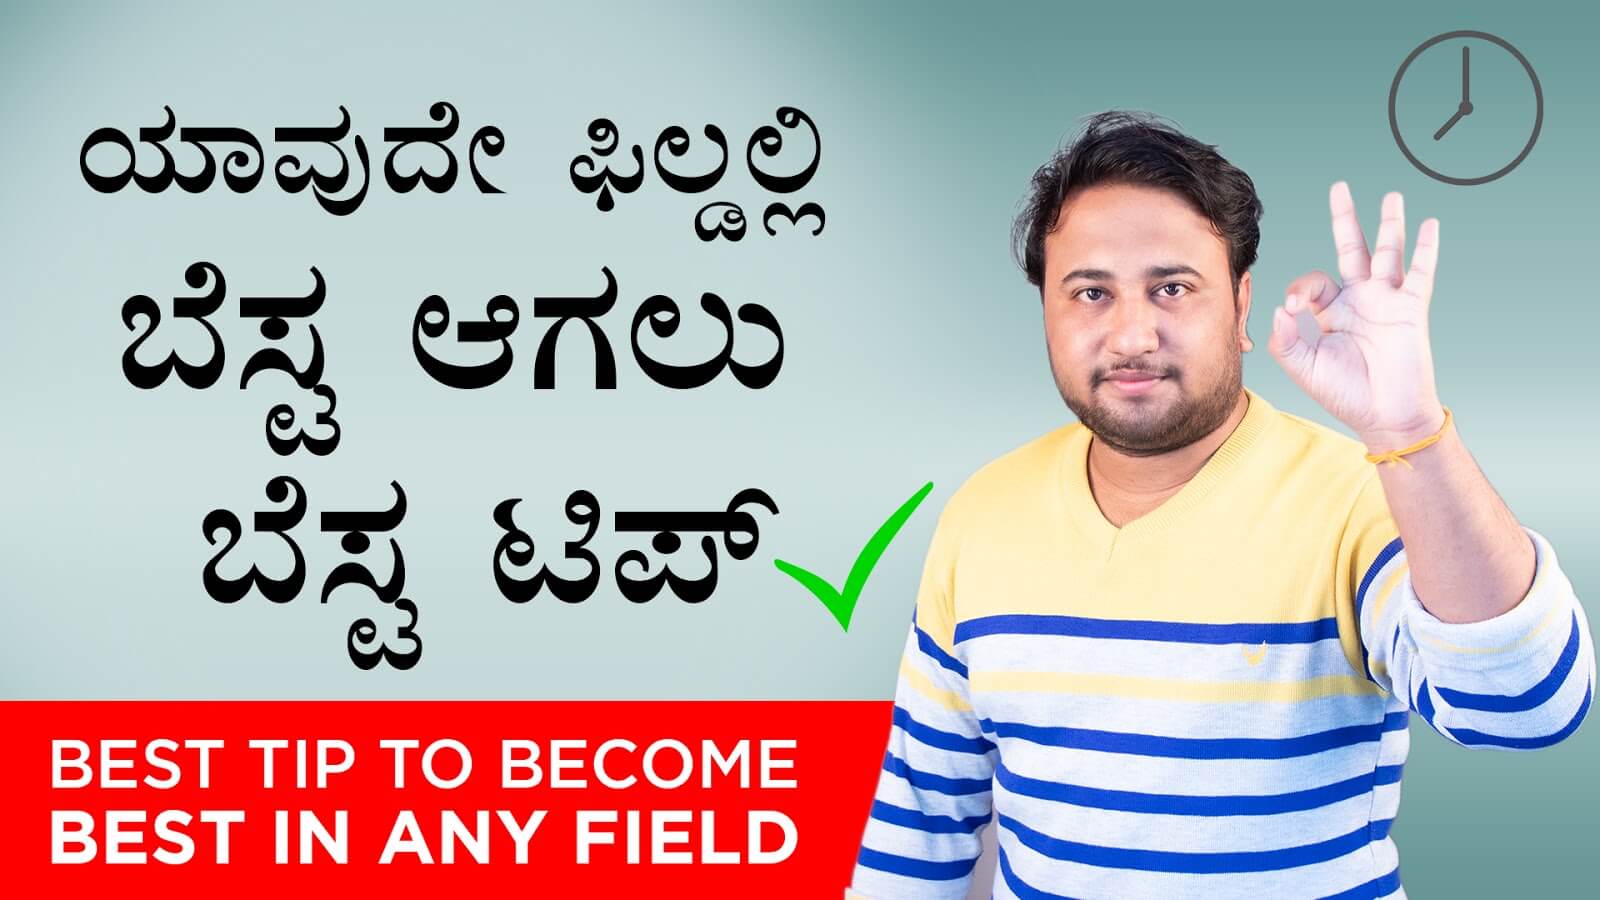 You are currently viewing ಯಾವುದೇ ಫಿಲ್ಡಲ್ಲಿ ಬೆಸ್ಟ ಆಗಲು ಬೆಸ್ಟ ಟಿಪ್ – Best Tip to become Best in any field in Kannada